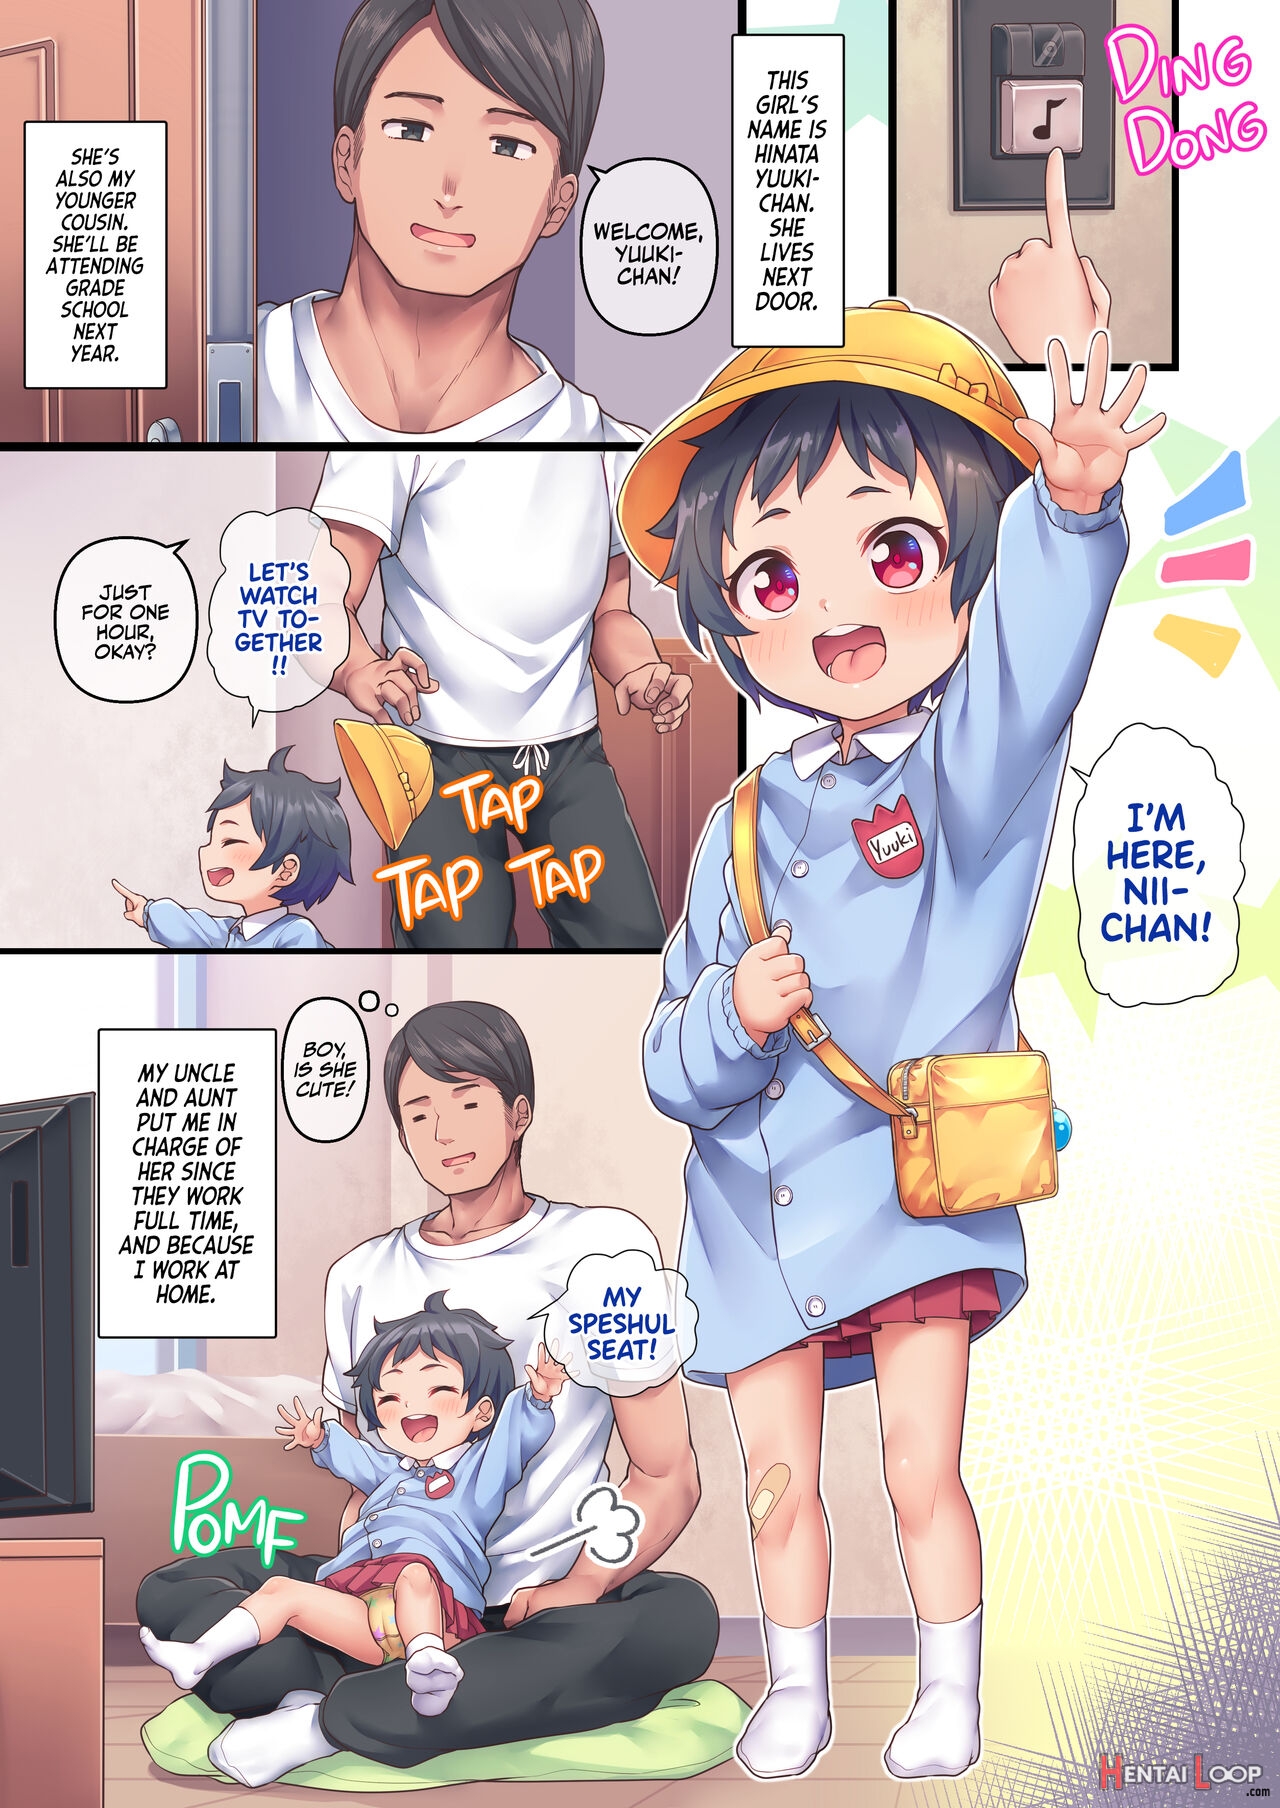 Nii-chan, Touch My Funny Place! page 3